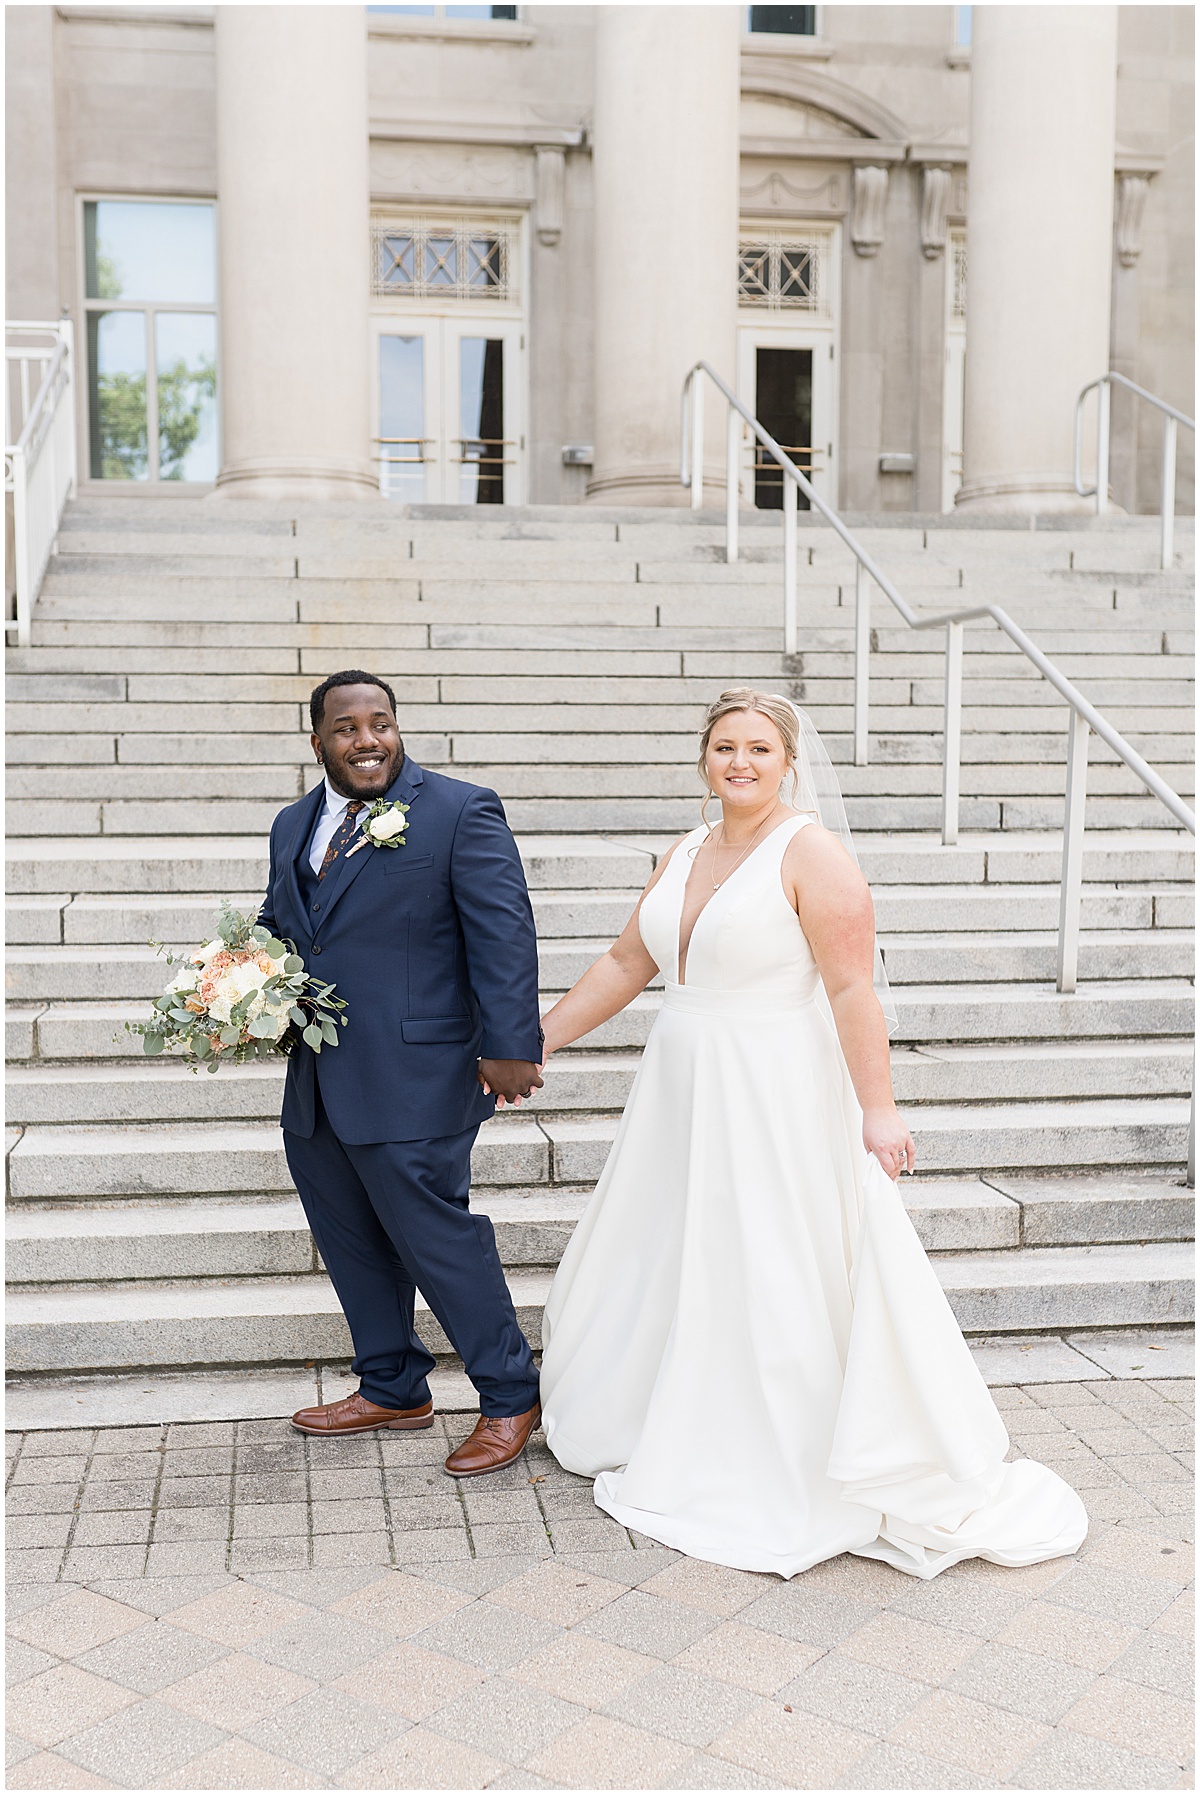 Bride and groom walking together at Purdue University